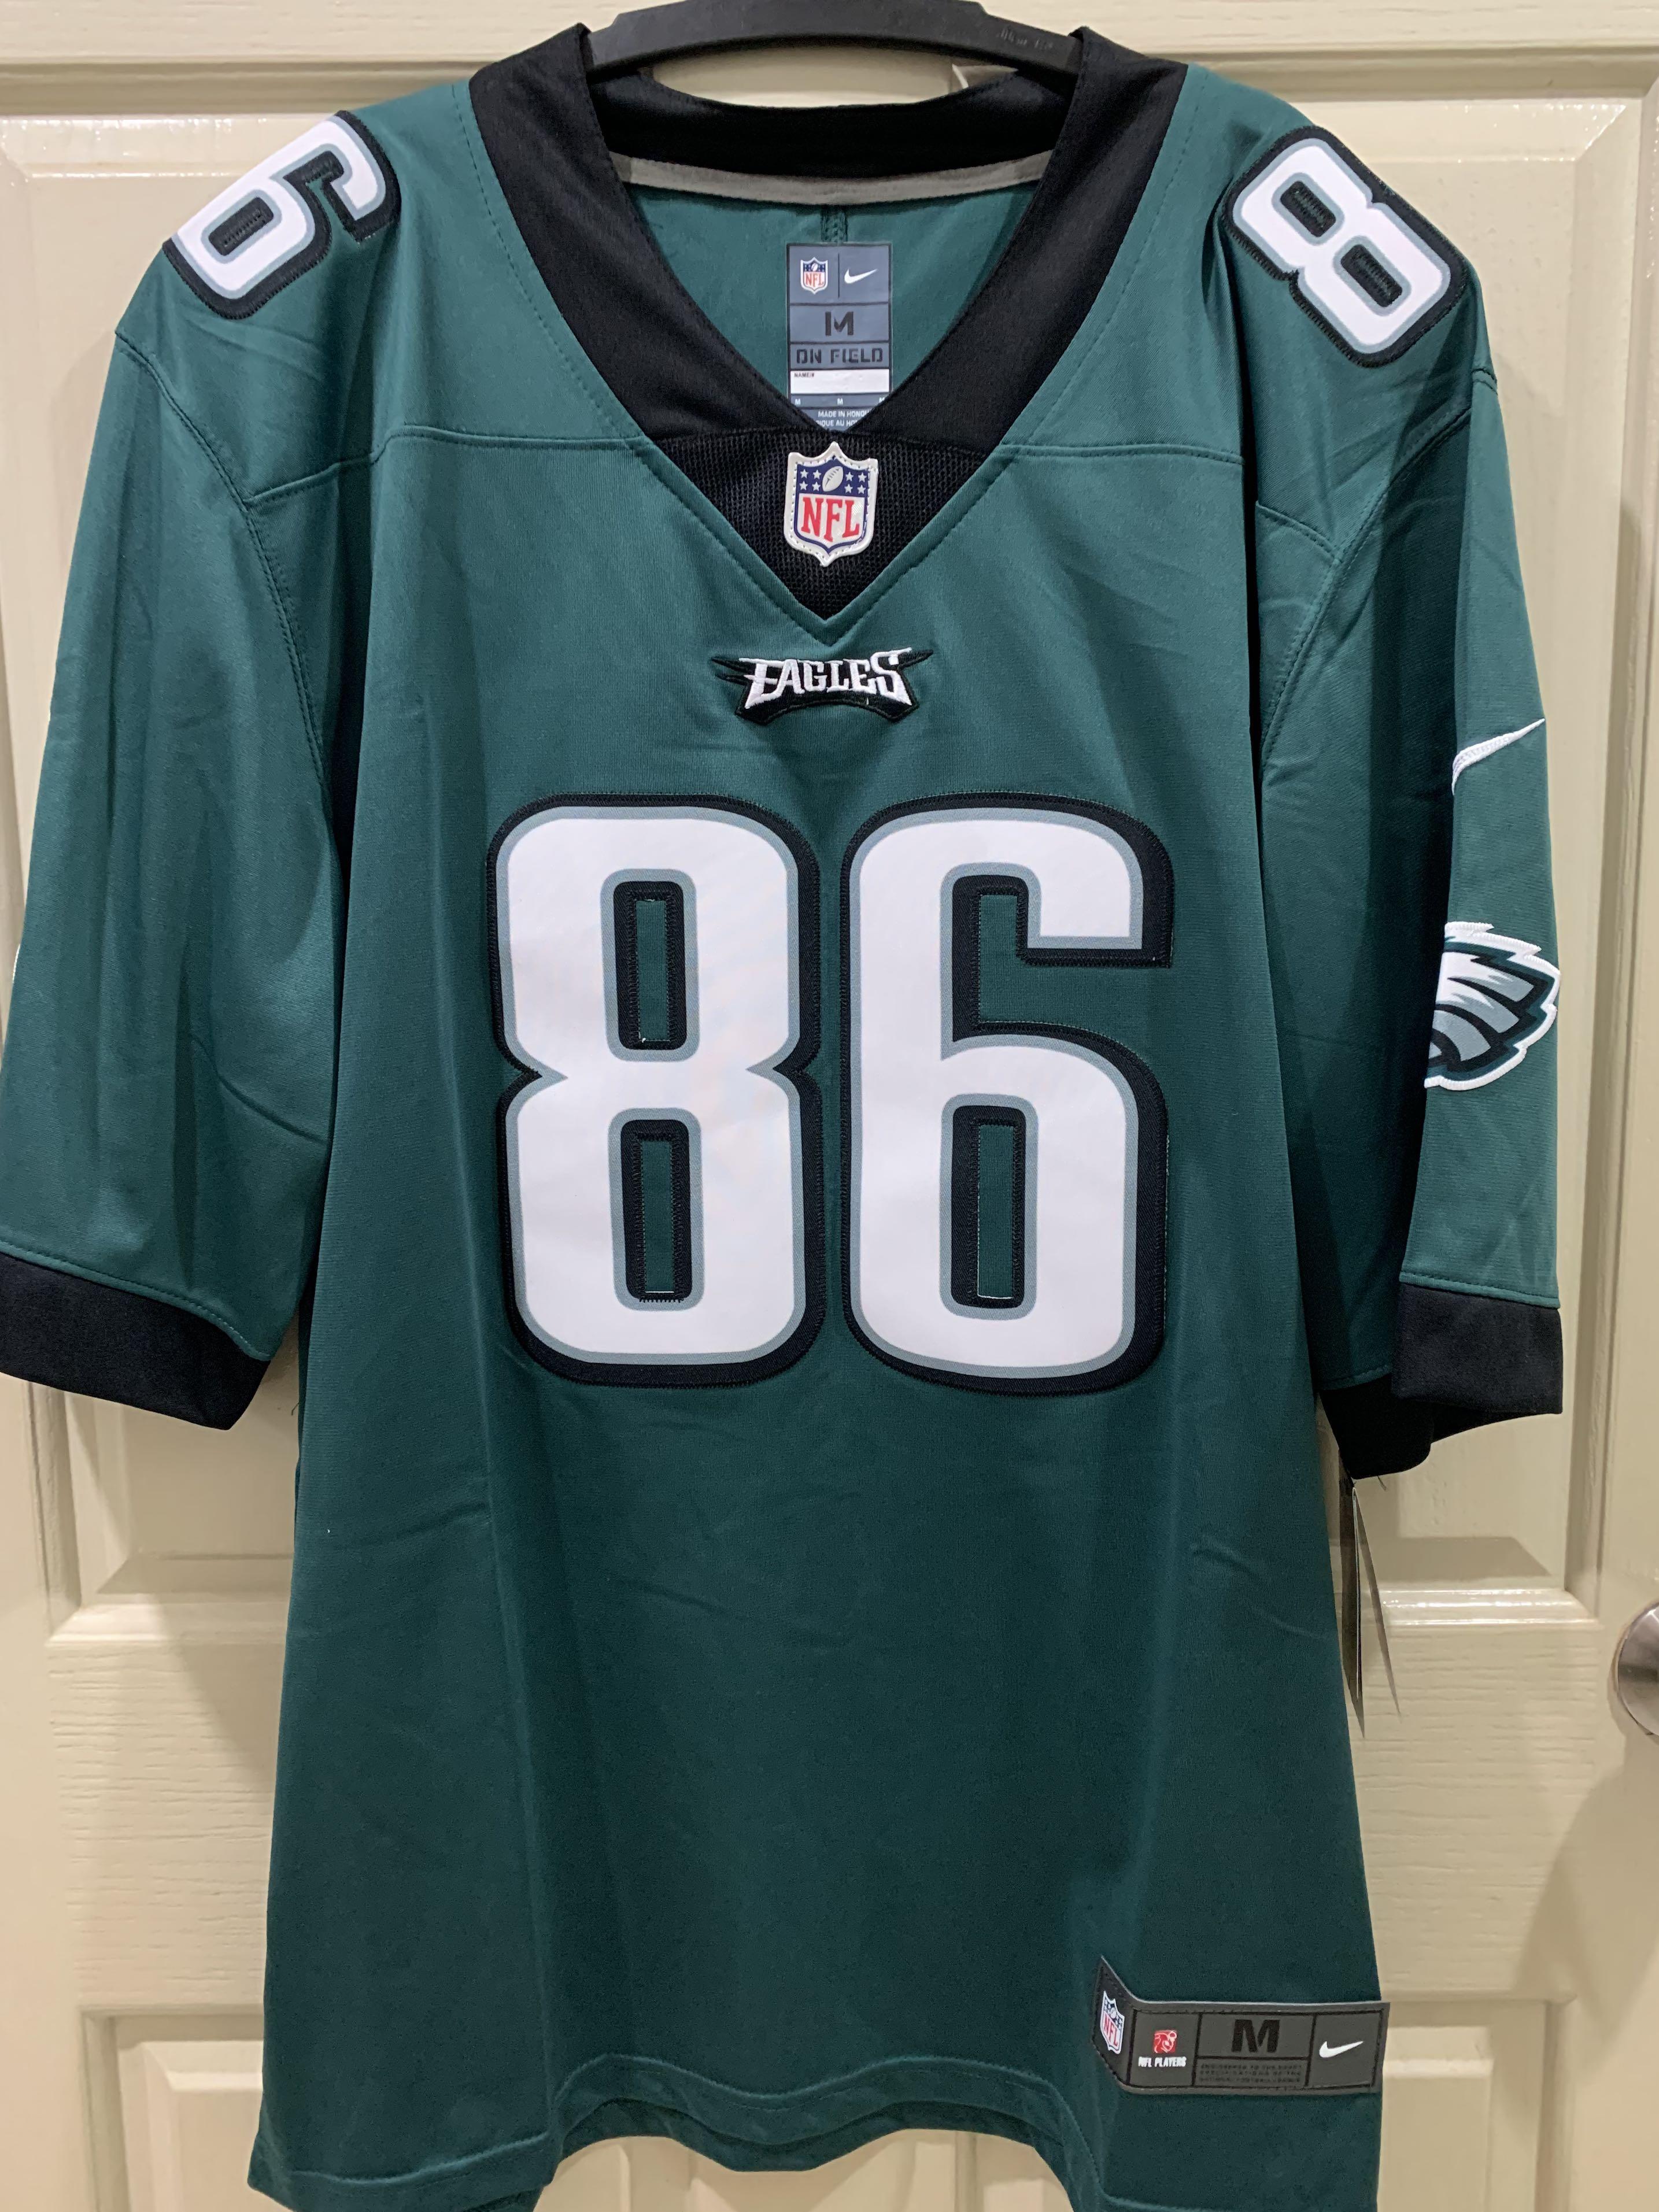 eagles 13 jersey